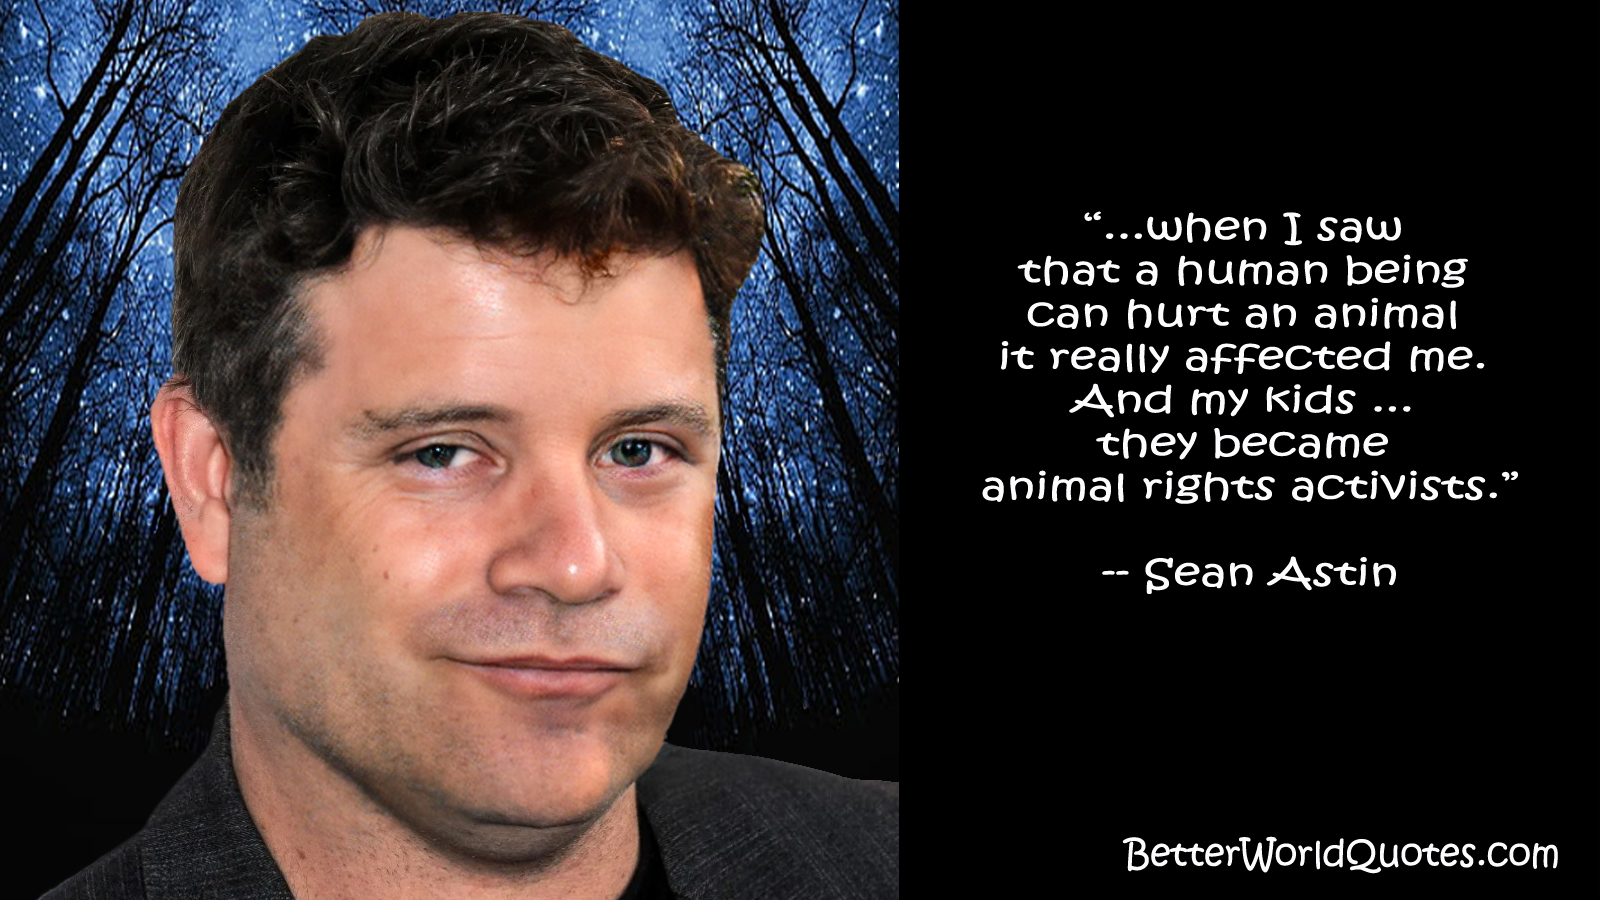 Sean Astin: ...when I saw that a human being can hurt an animal it really affected me. And my kids ... they became animal rights activists.